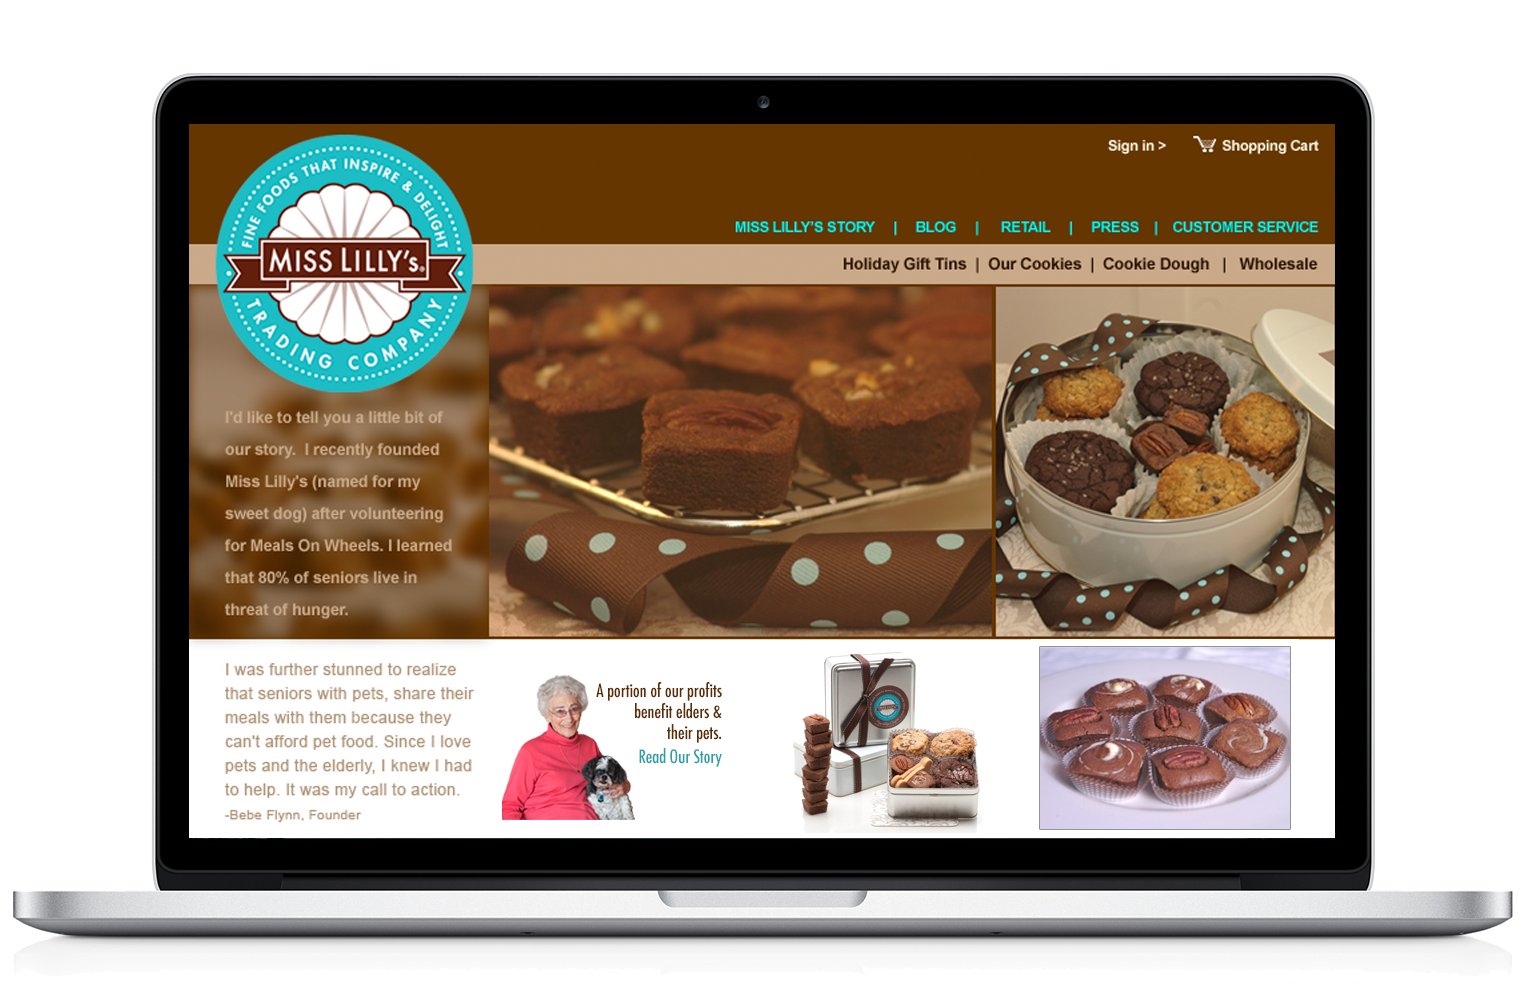 E-Commerce Website - Miss Lilly's Trading Company